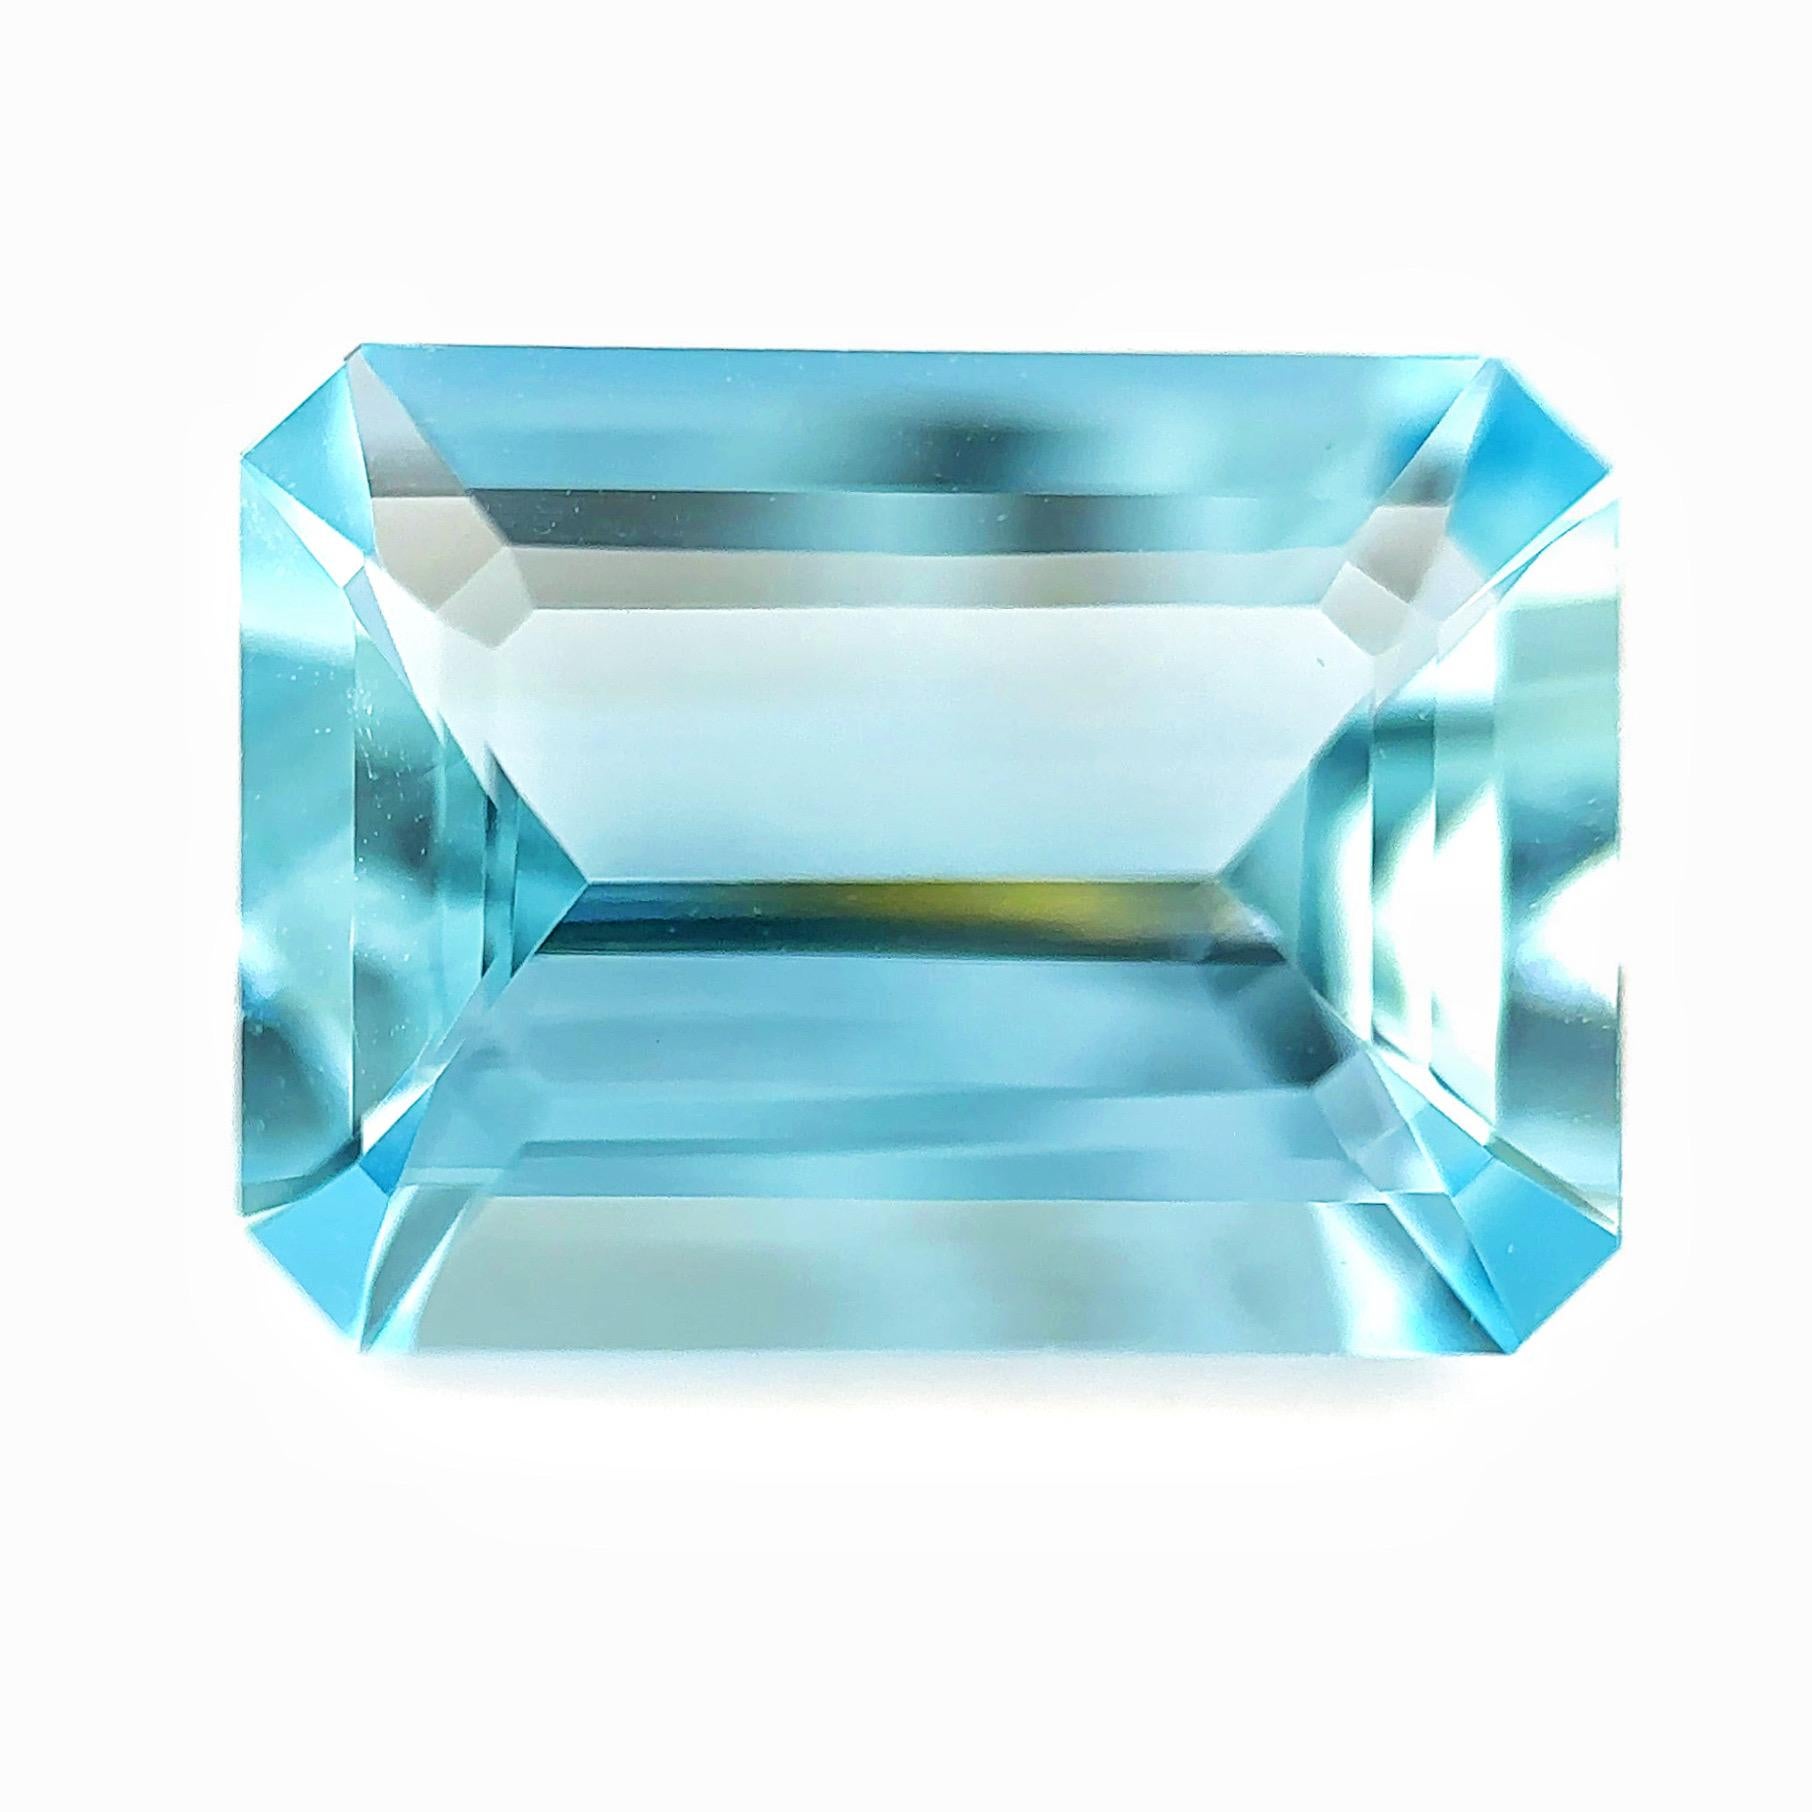 3.78 Carat Natural Santa Maria Color Aquamarine Loose Stone

Appointed lab certificate can be arranged upon request

This Item is ideal for your design as an engagement ring, cocktail ring, necklace, bracelet, etc.


ABOUT US

Xuelai Jewellery